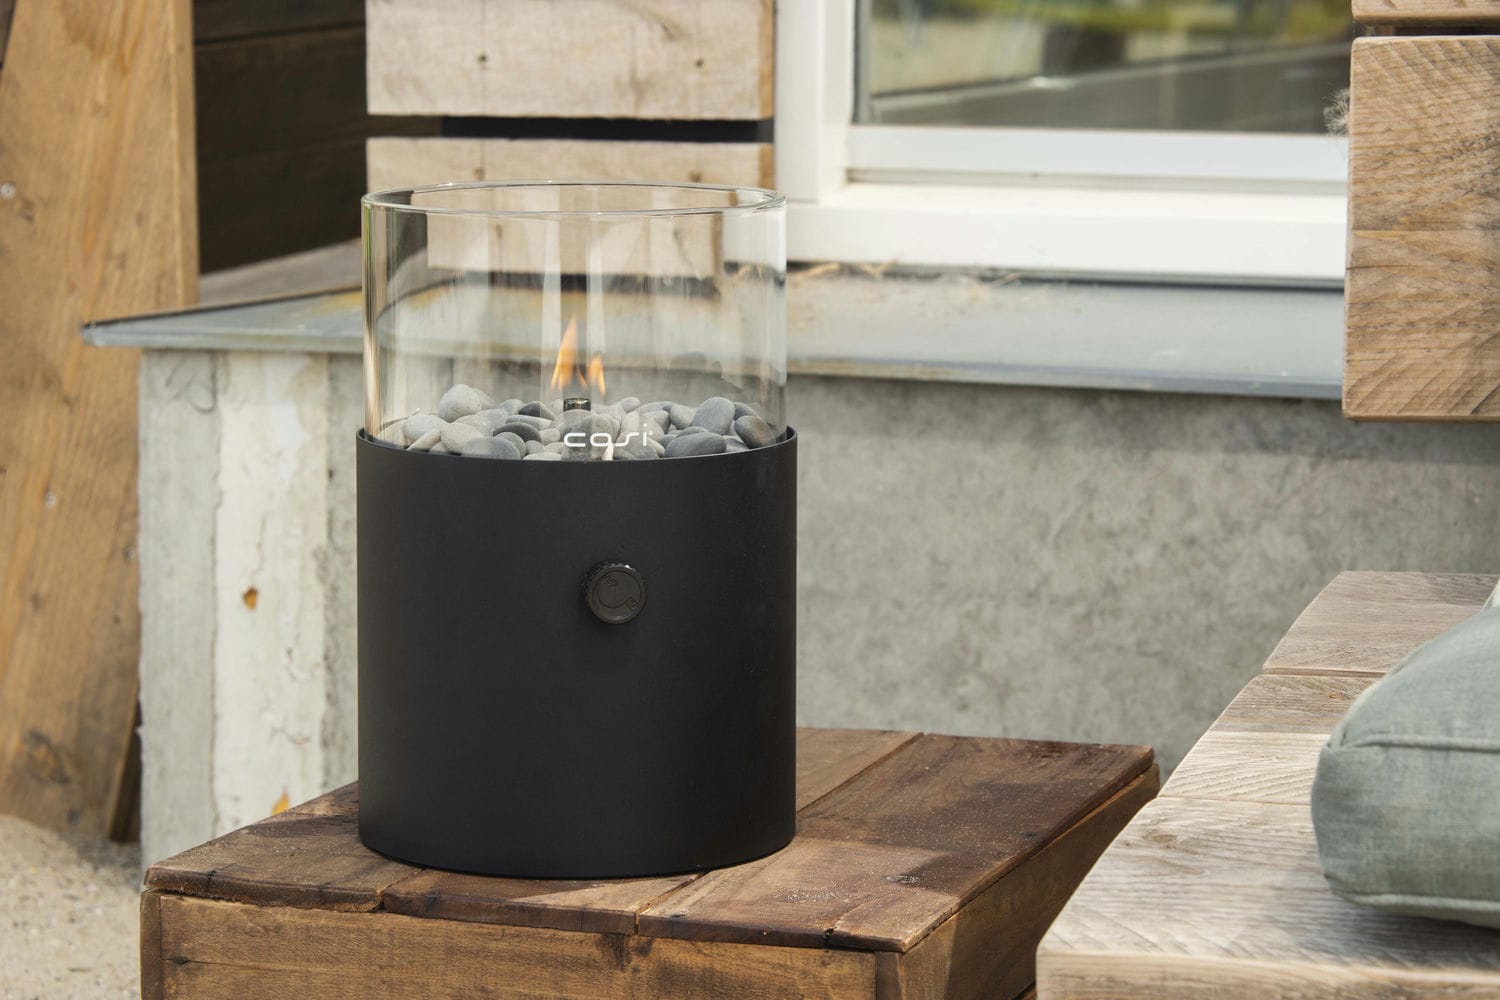 Cosiscoop Extra Large Black Fire Lantern